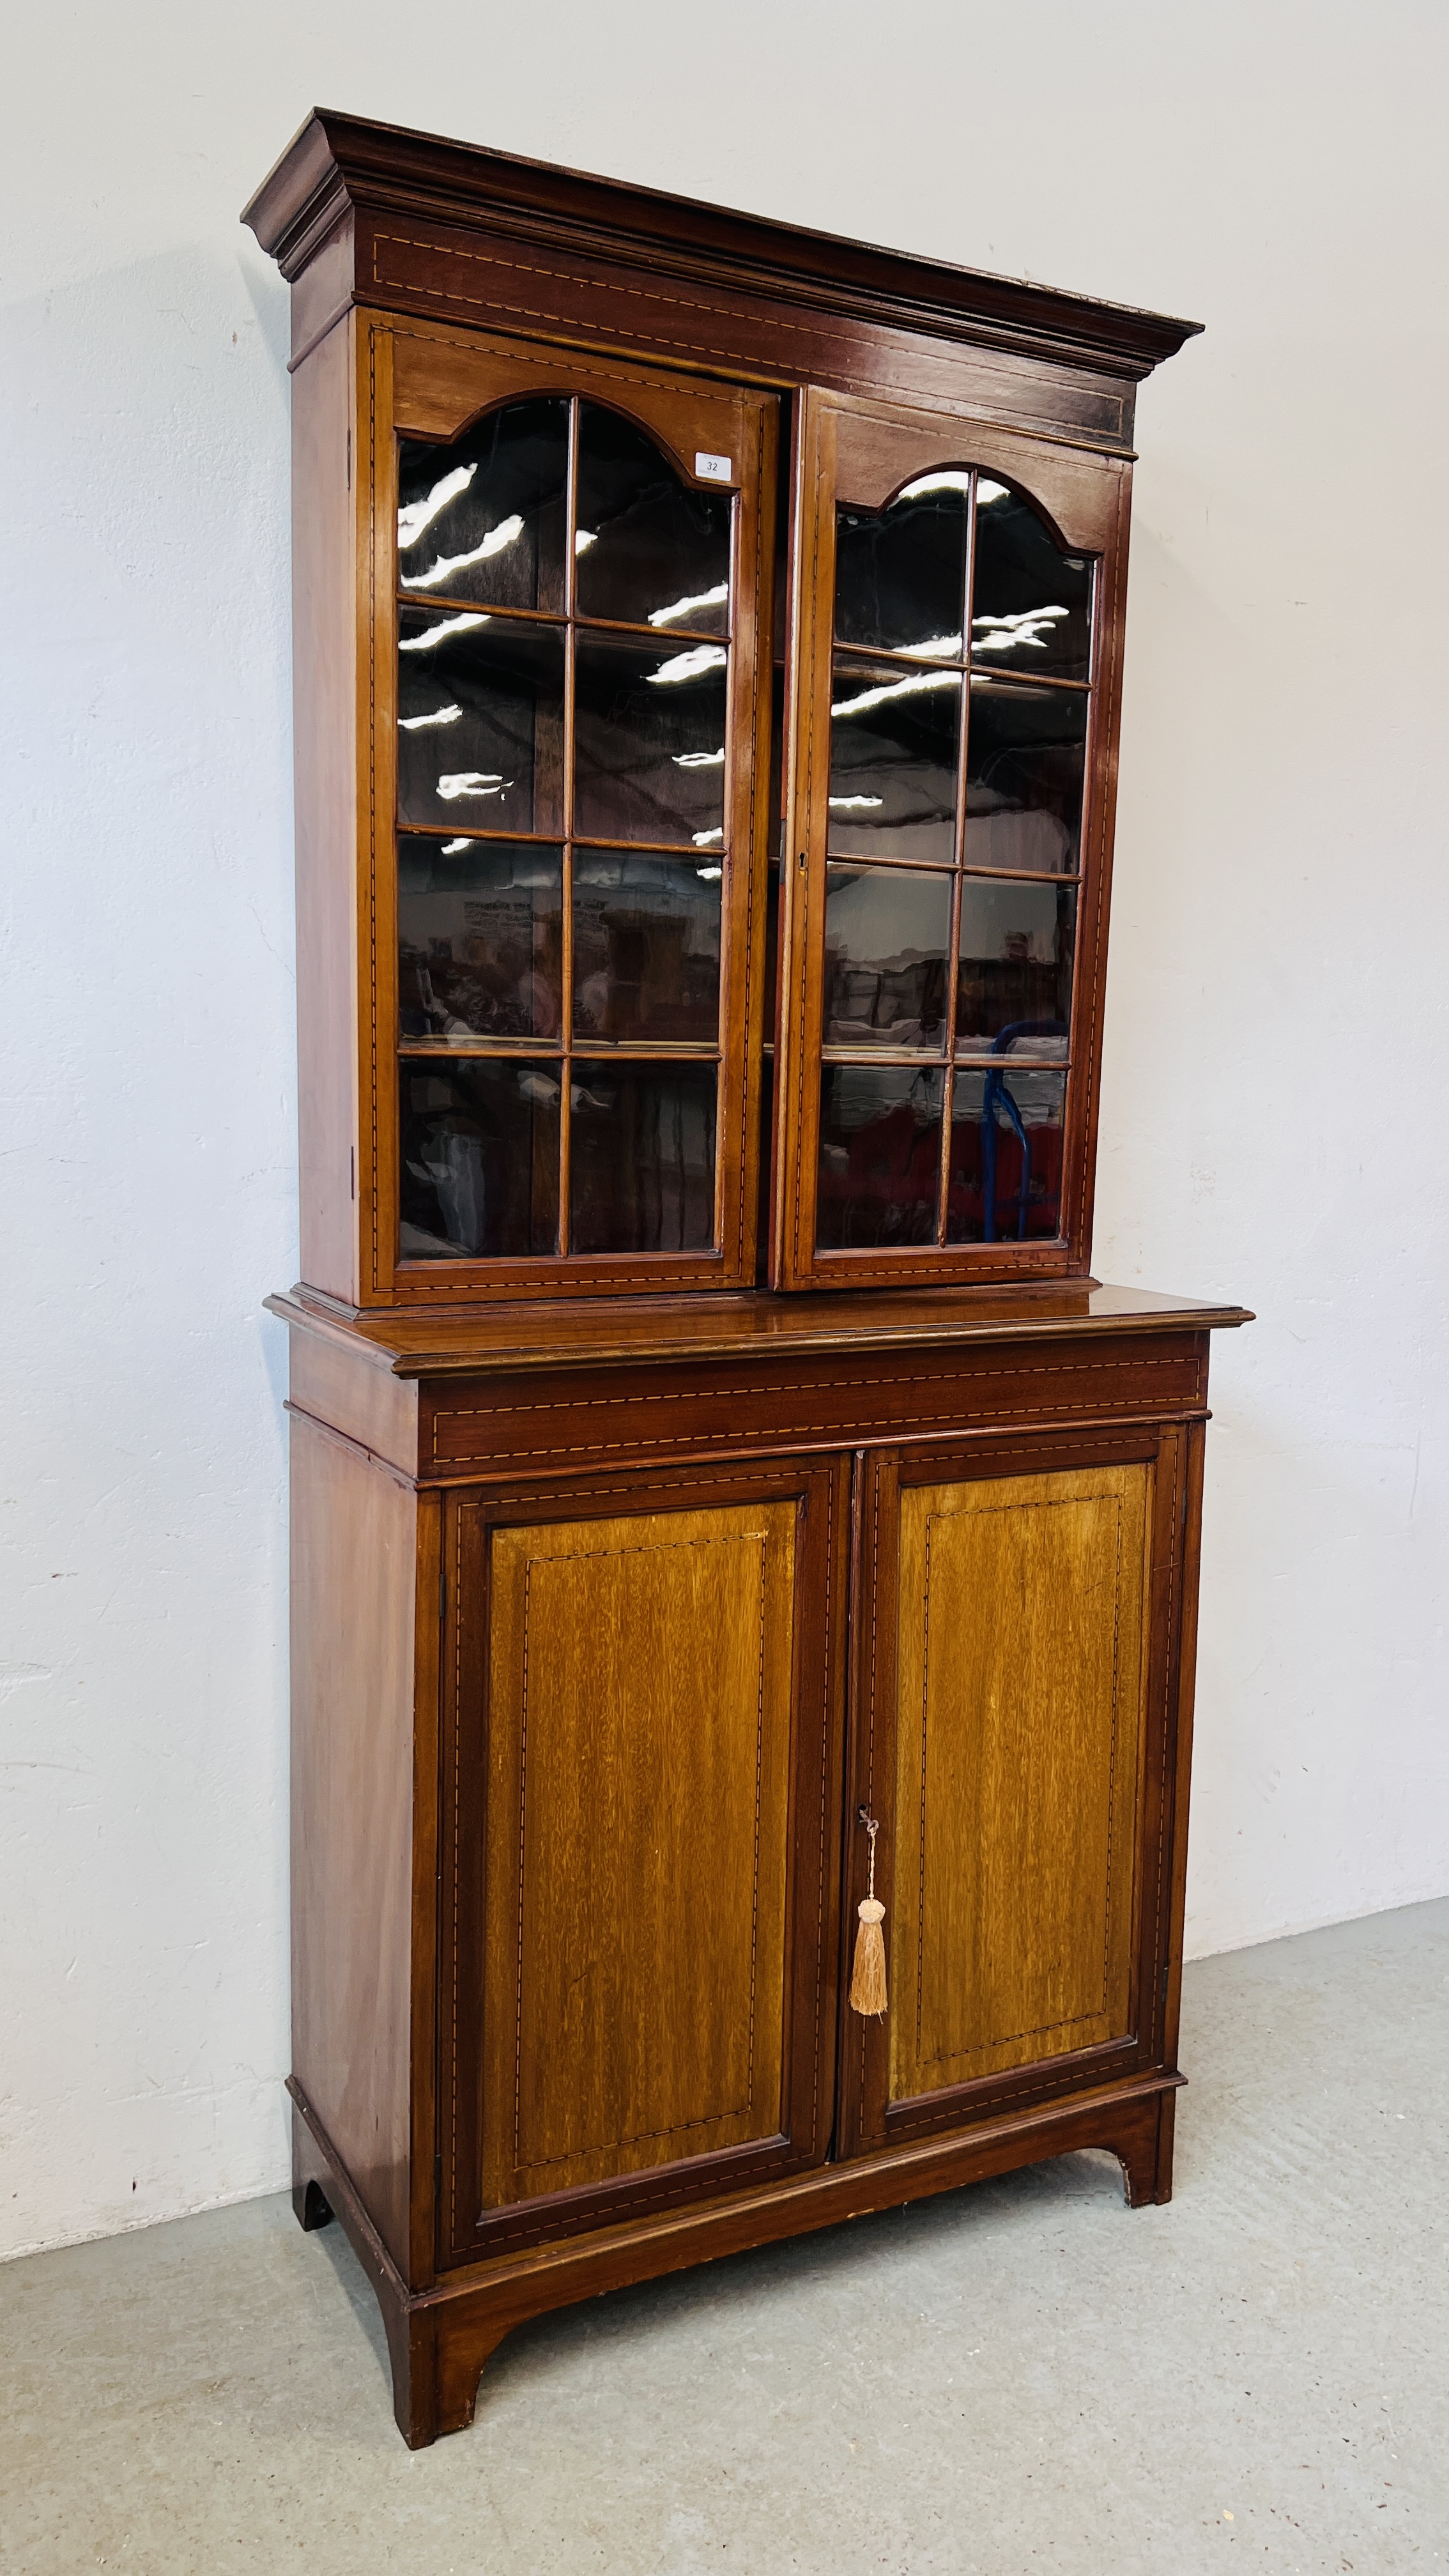 AN EDWARDIAN MAHOGANY BOOKCASE WITH CUPBOARD BELOW, WIDTH 96CM. DEPTH 46CM. HEIGHT 208CM. - Image 2 of 14